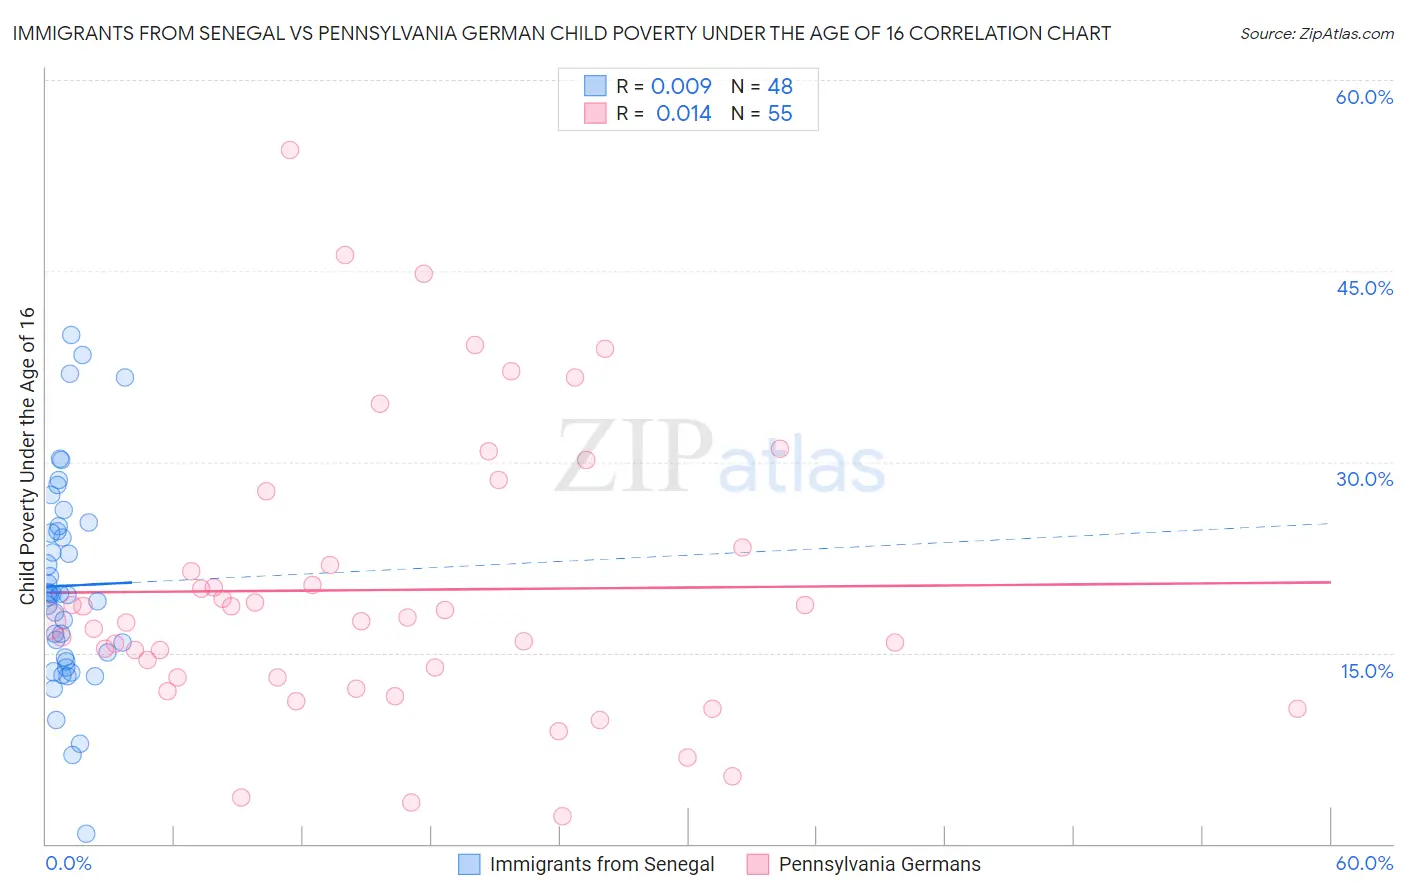 Immigrants from Senegal vs Pennsylvania German Child Poverty Under the Age of 16